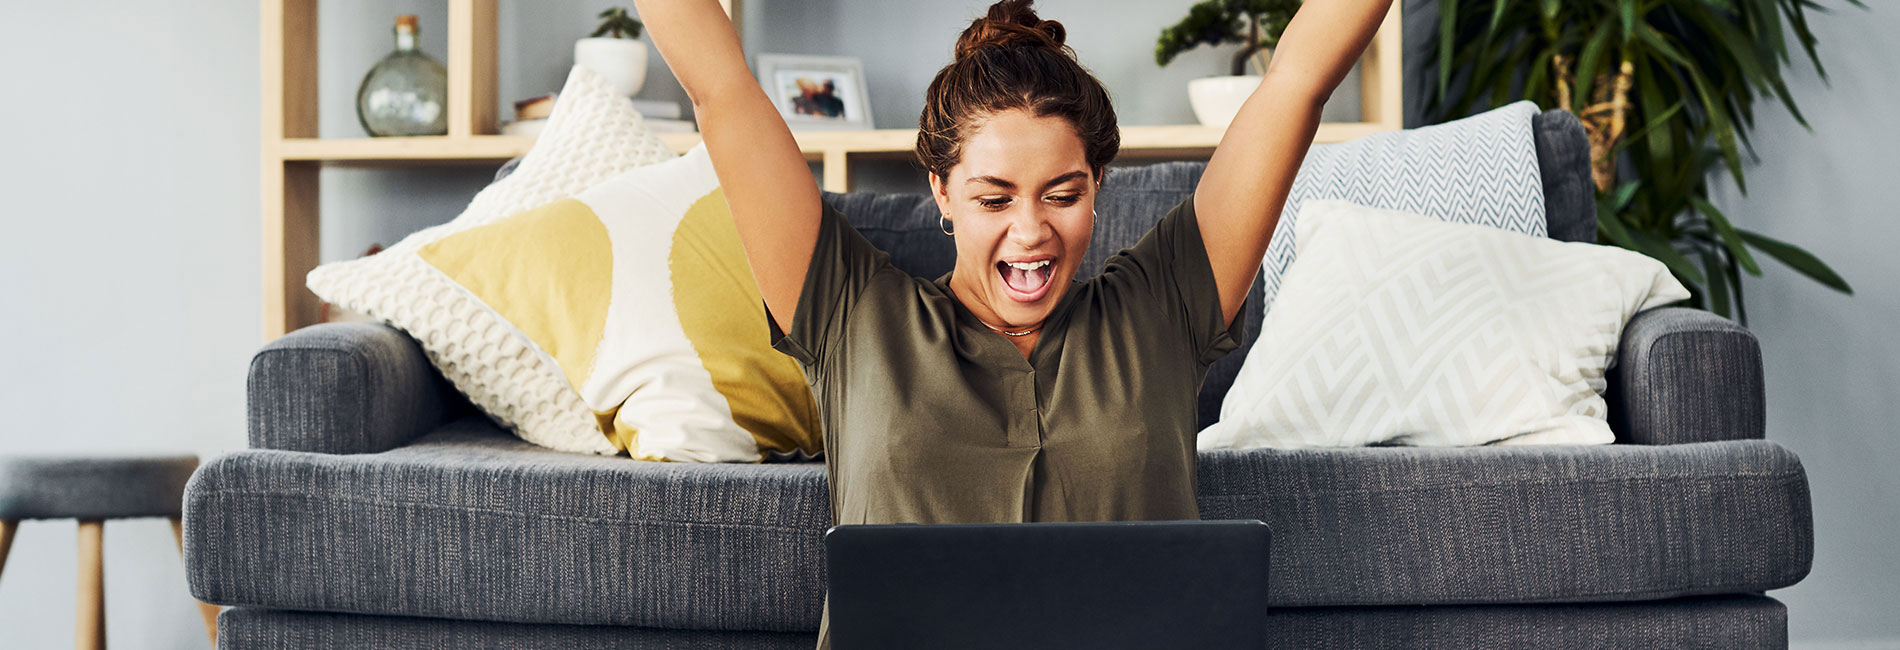 A woman celebrating in front of her laptop